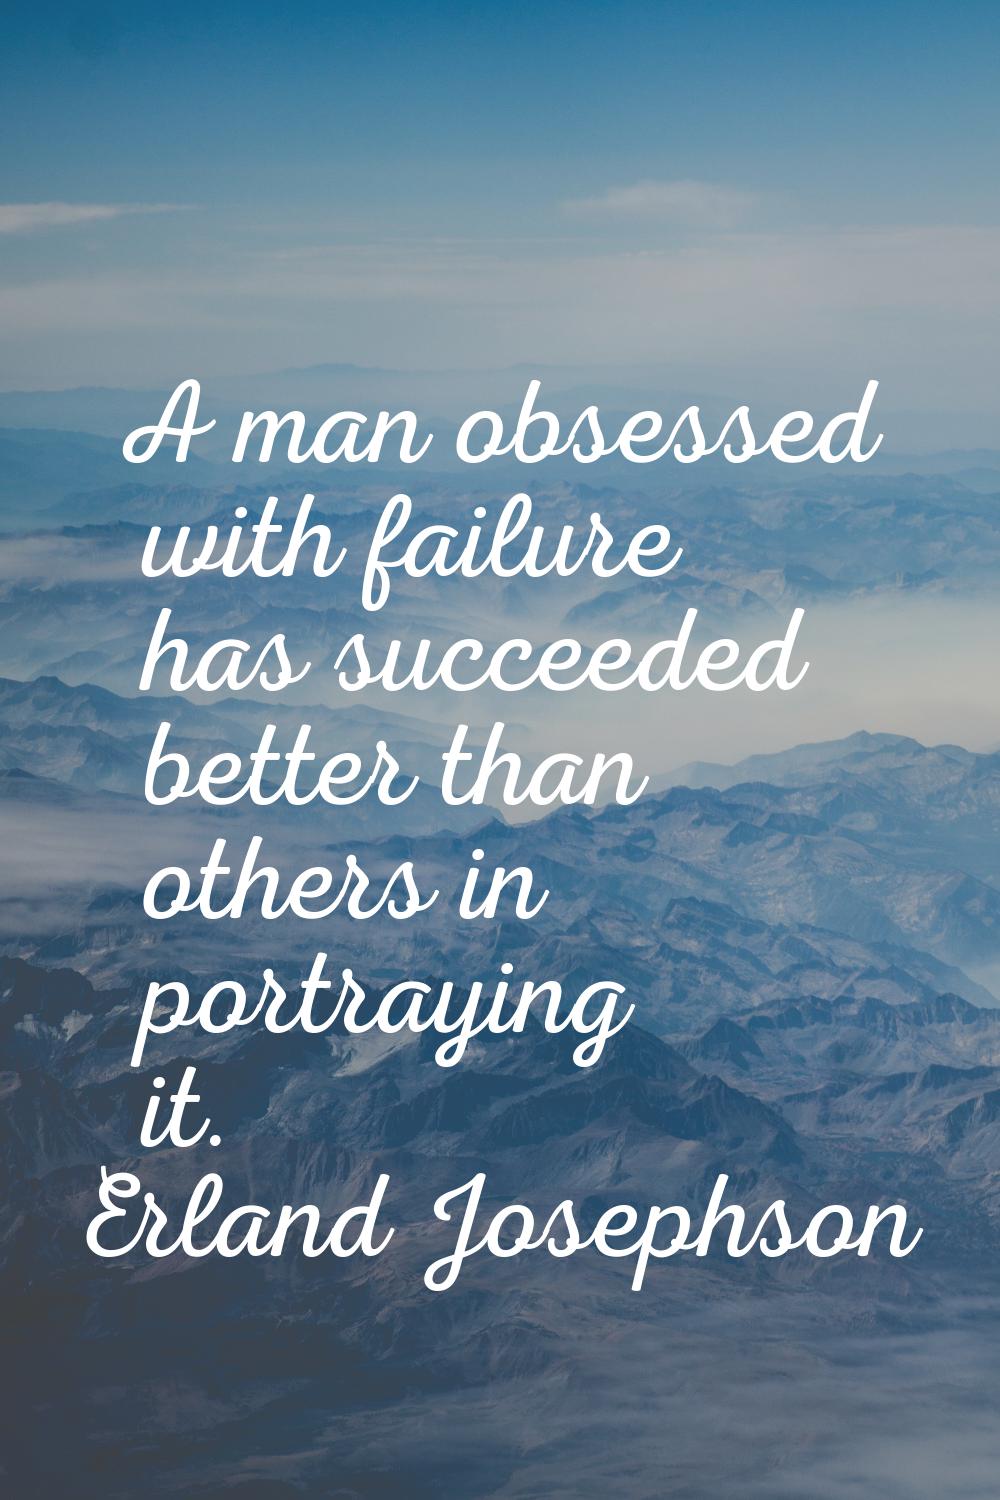 A man obsessed with failure has succeeded better than others in portraying it.